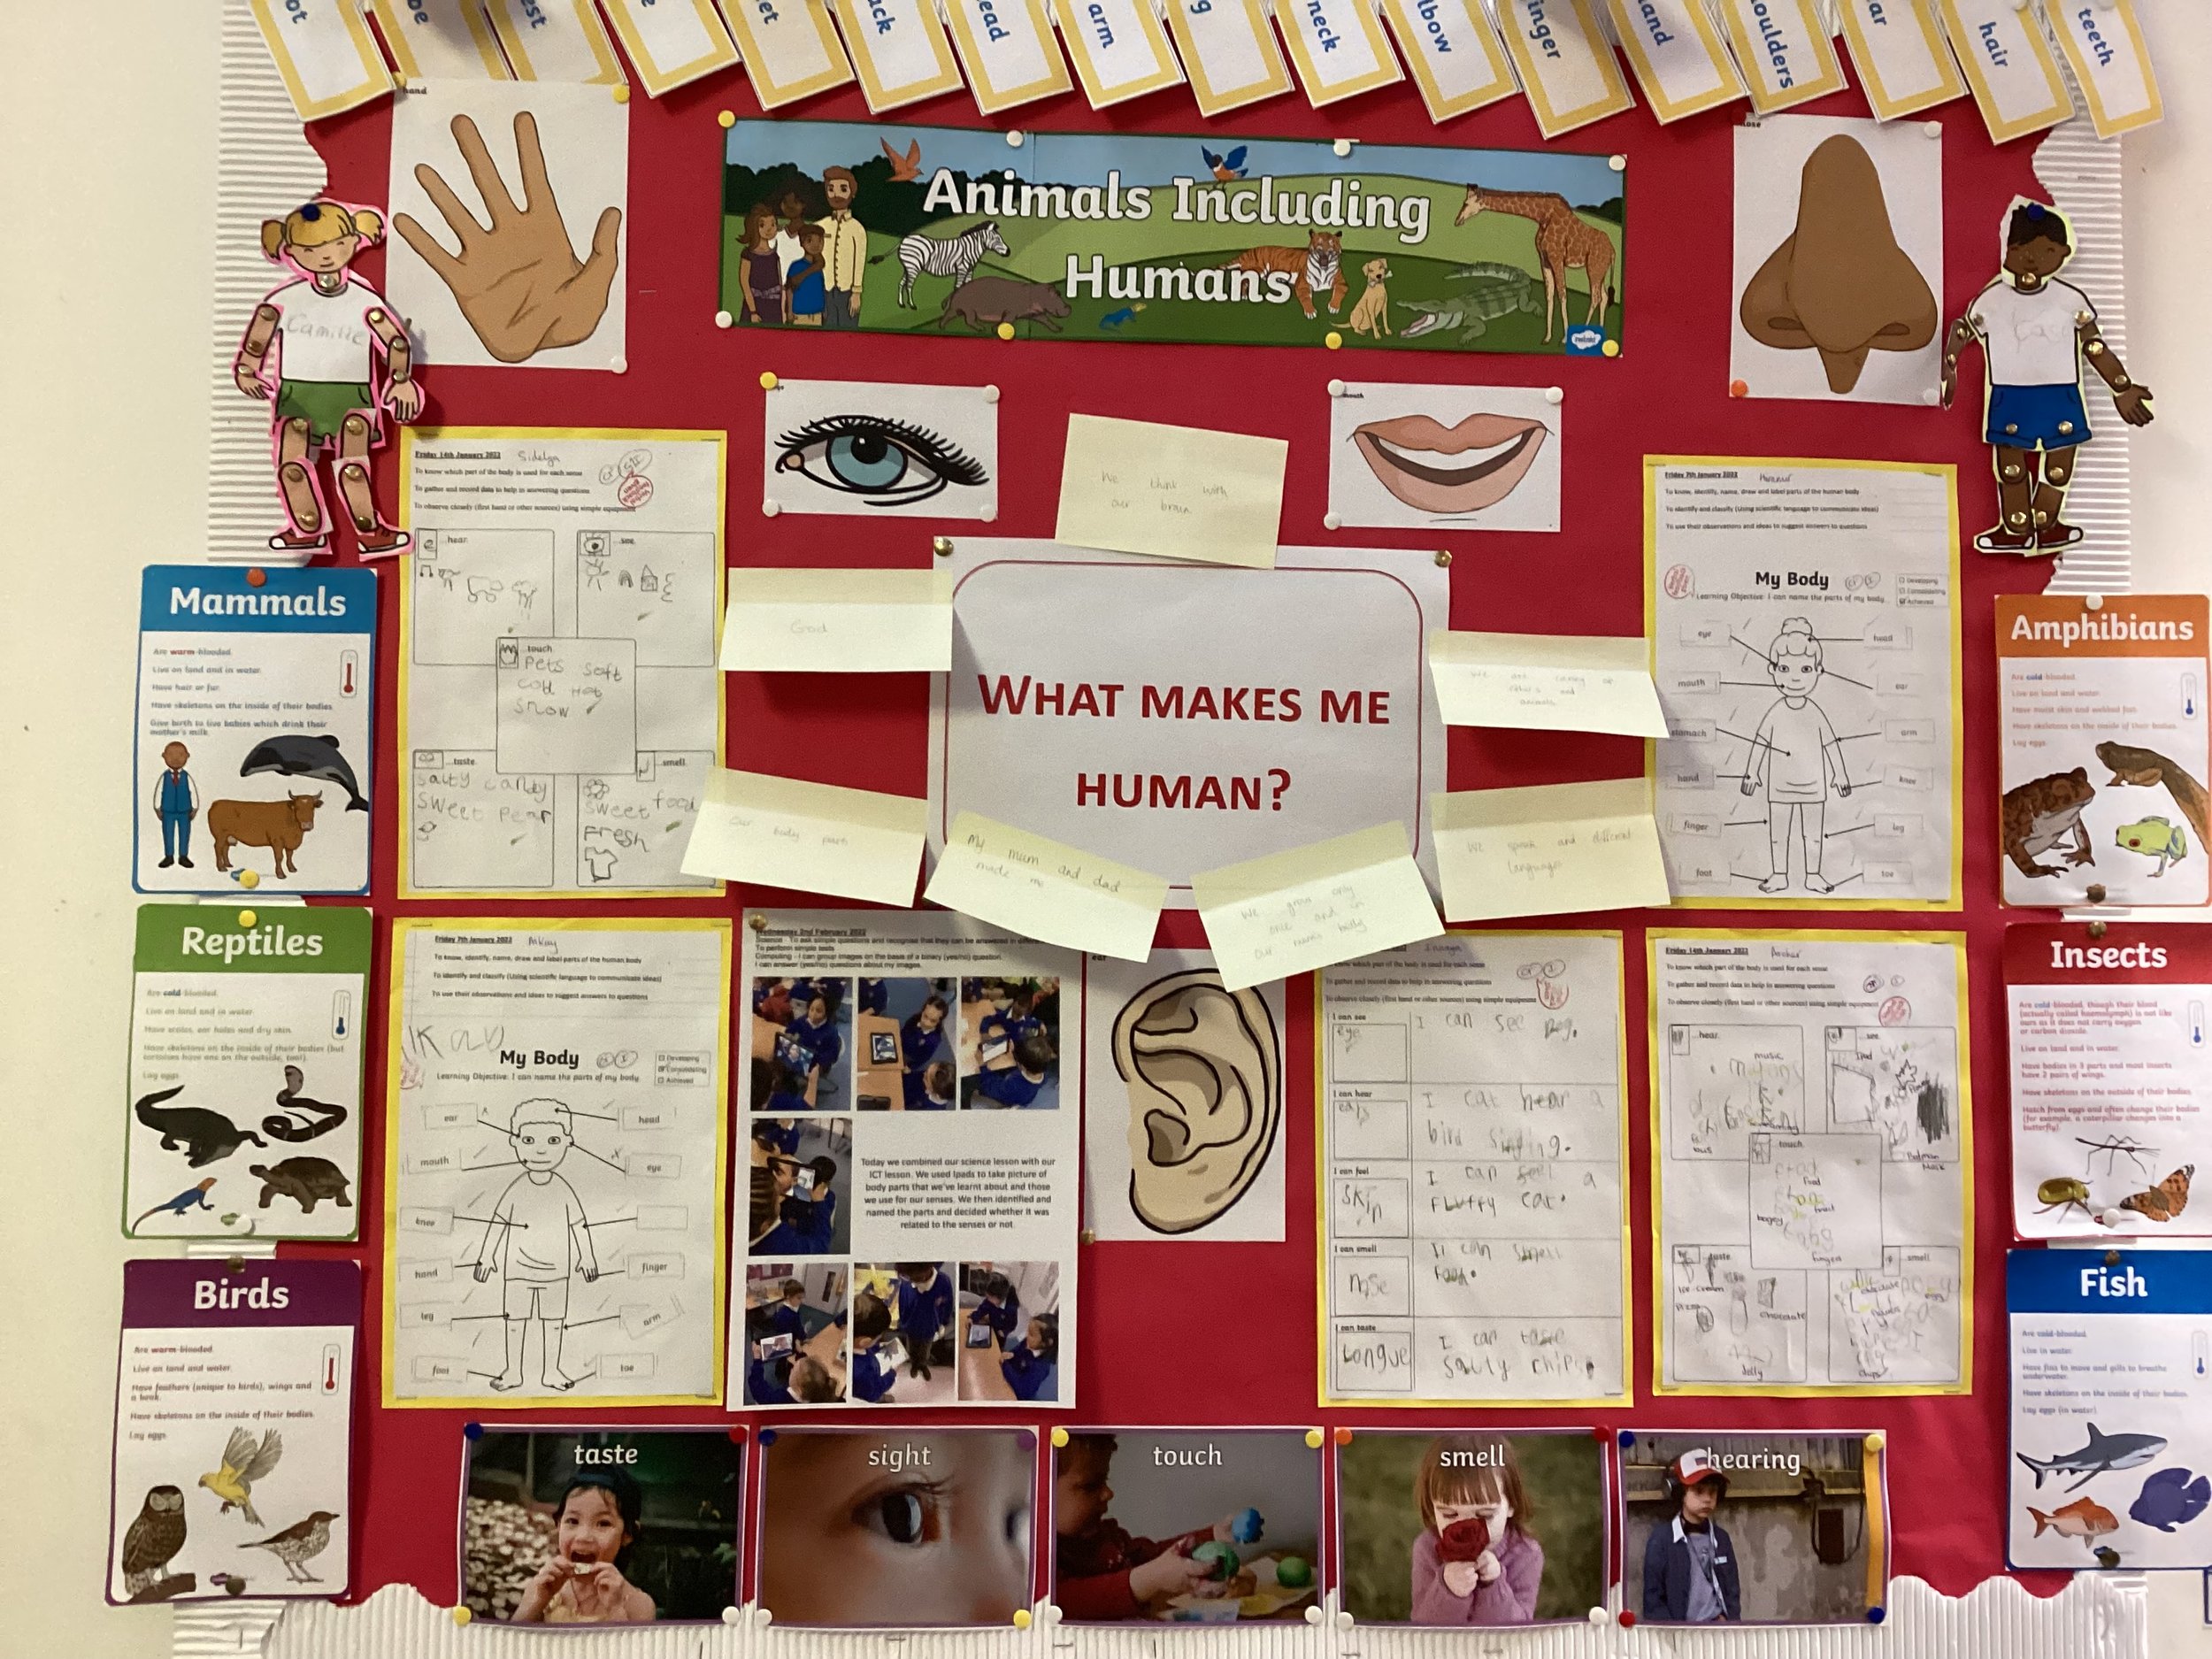 Humans Including Animals!